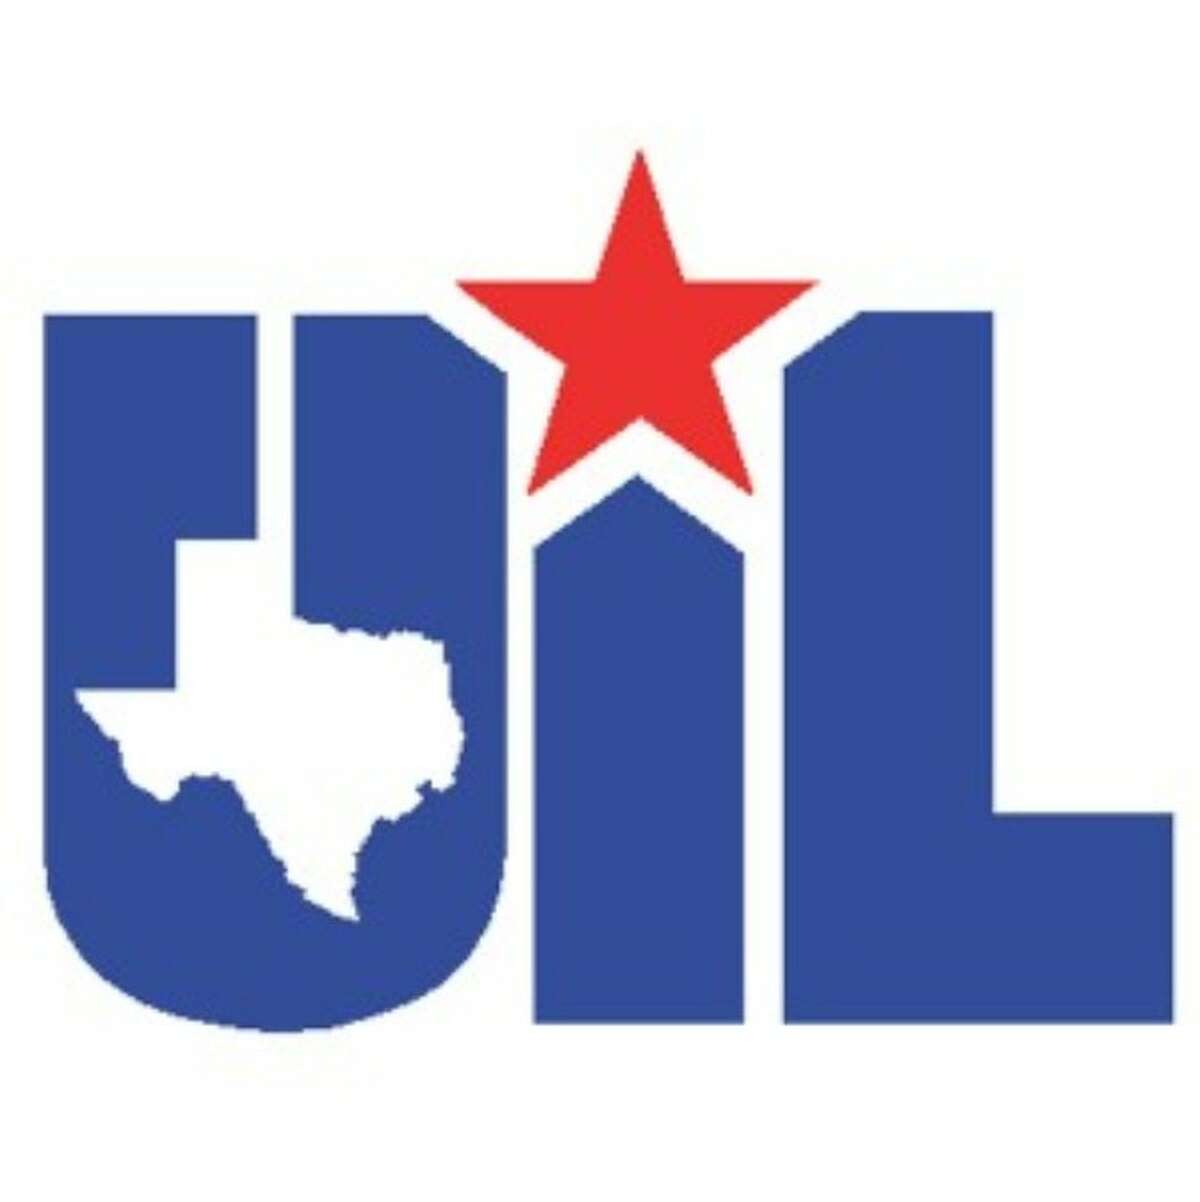 The UIL logo.